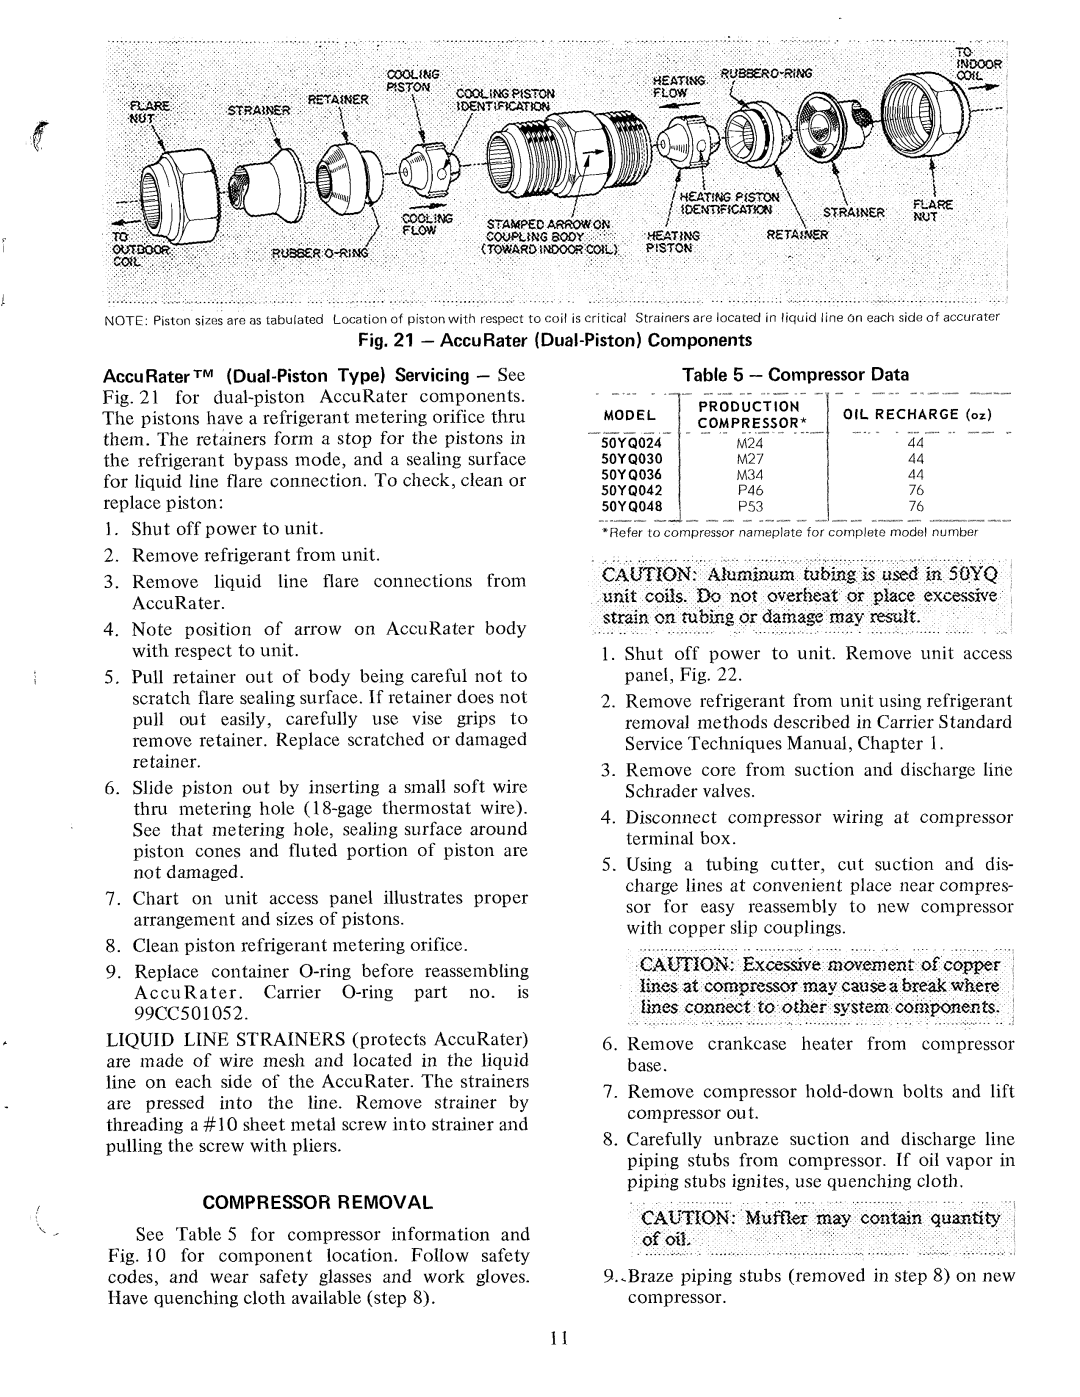 Carrier 50YQ manual 